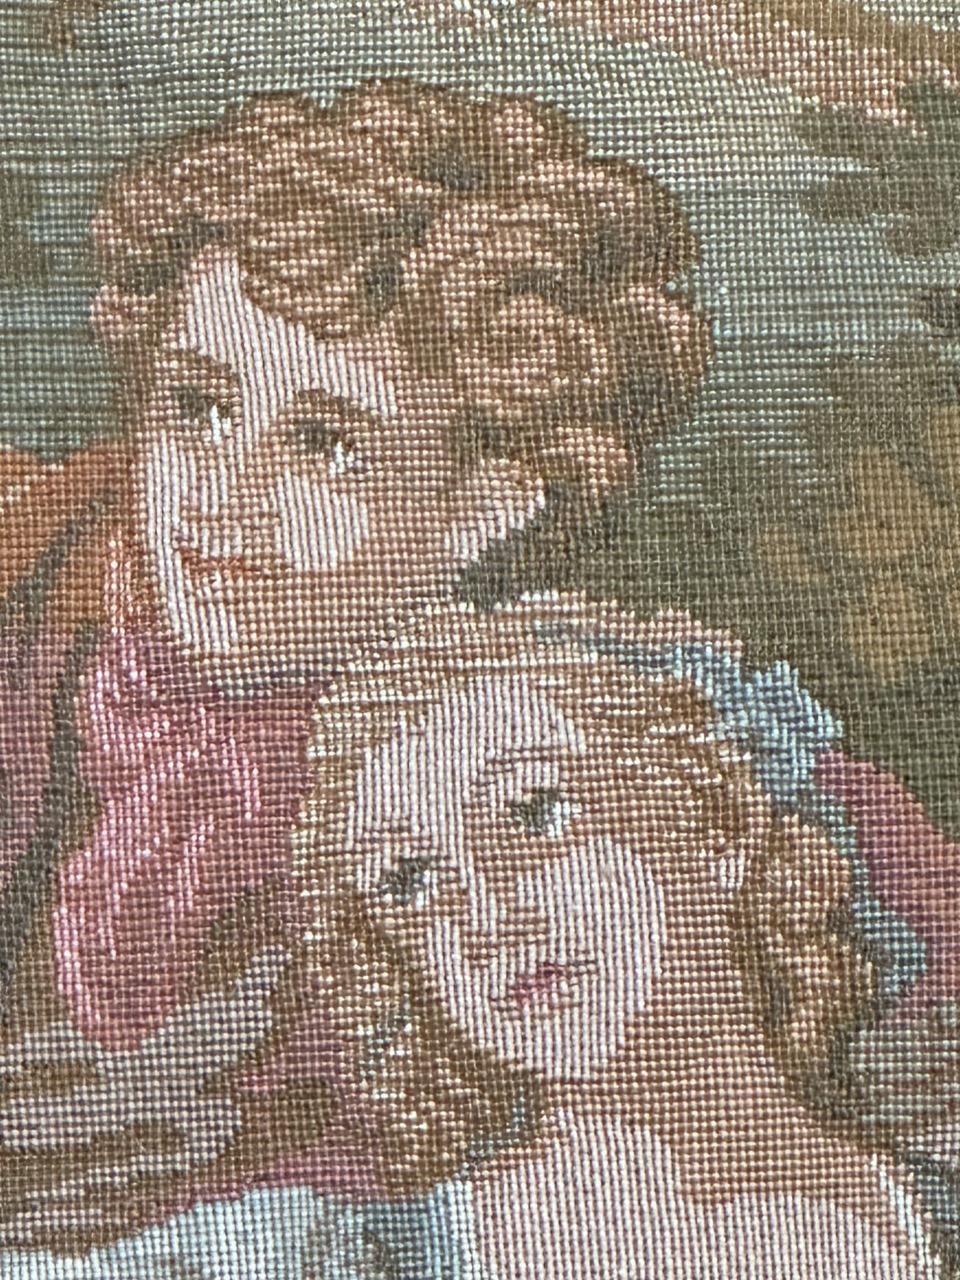 Bobyrug’s vintage French jacquard tapestry Aubusson style, “romantic rendezvous” For Sale 8